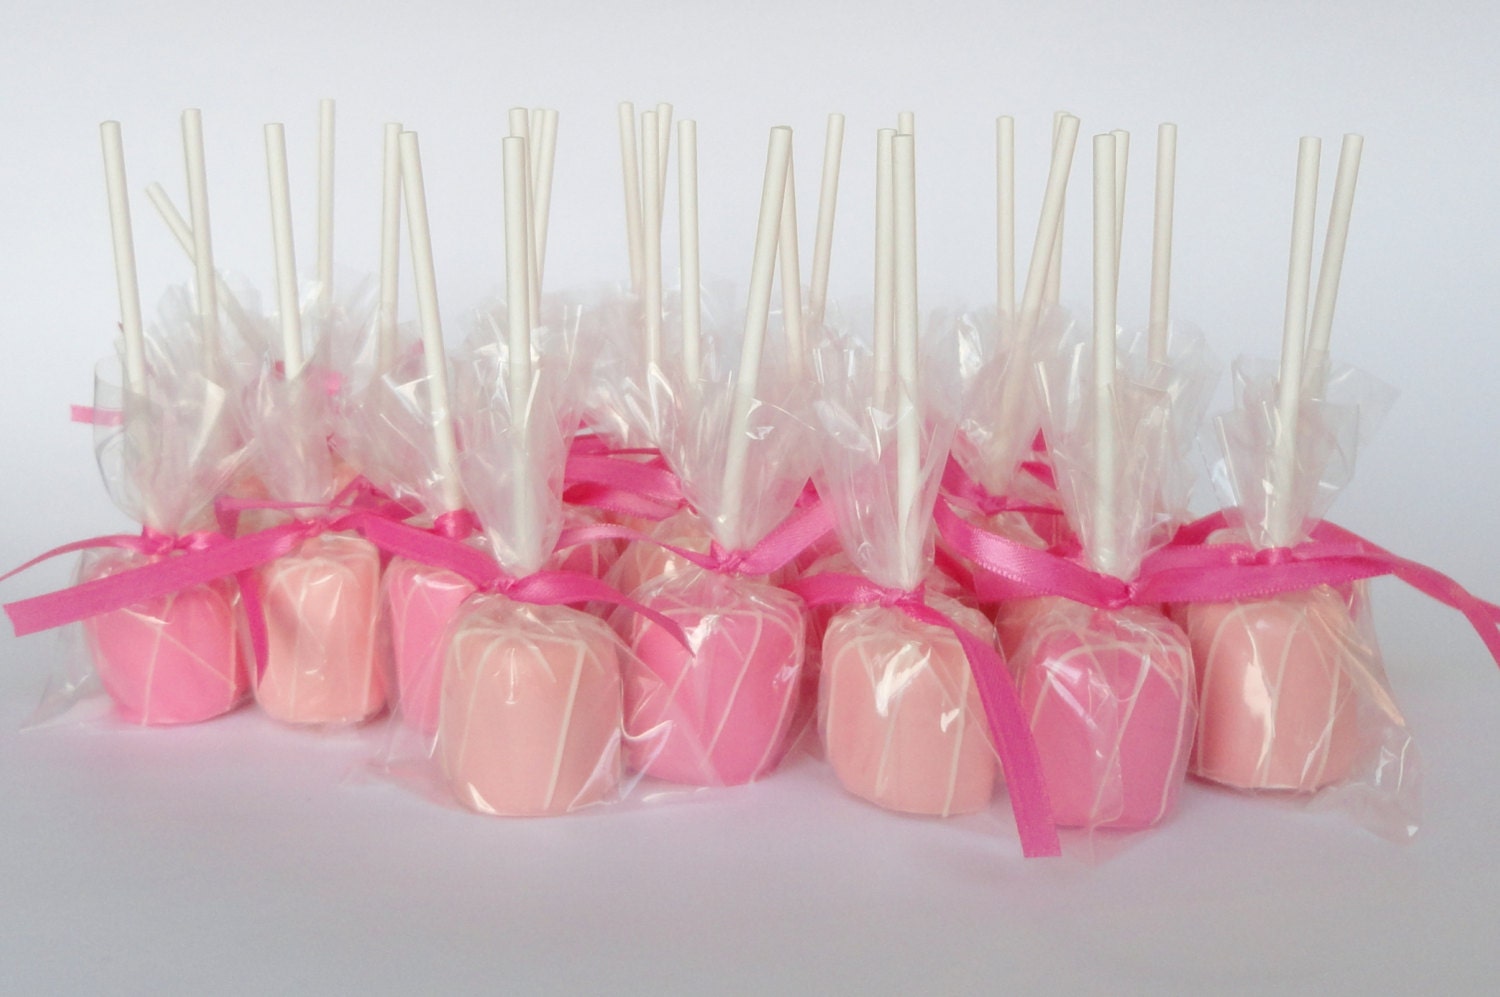 1 DOZEN Chocolate Dipped MARSHMALLOW POPS  --  Great favors for Weddings, Baby Showers, Bridal Showers, Princess Party, Valentines Day